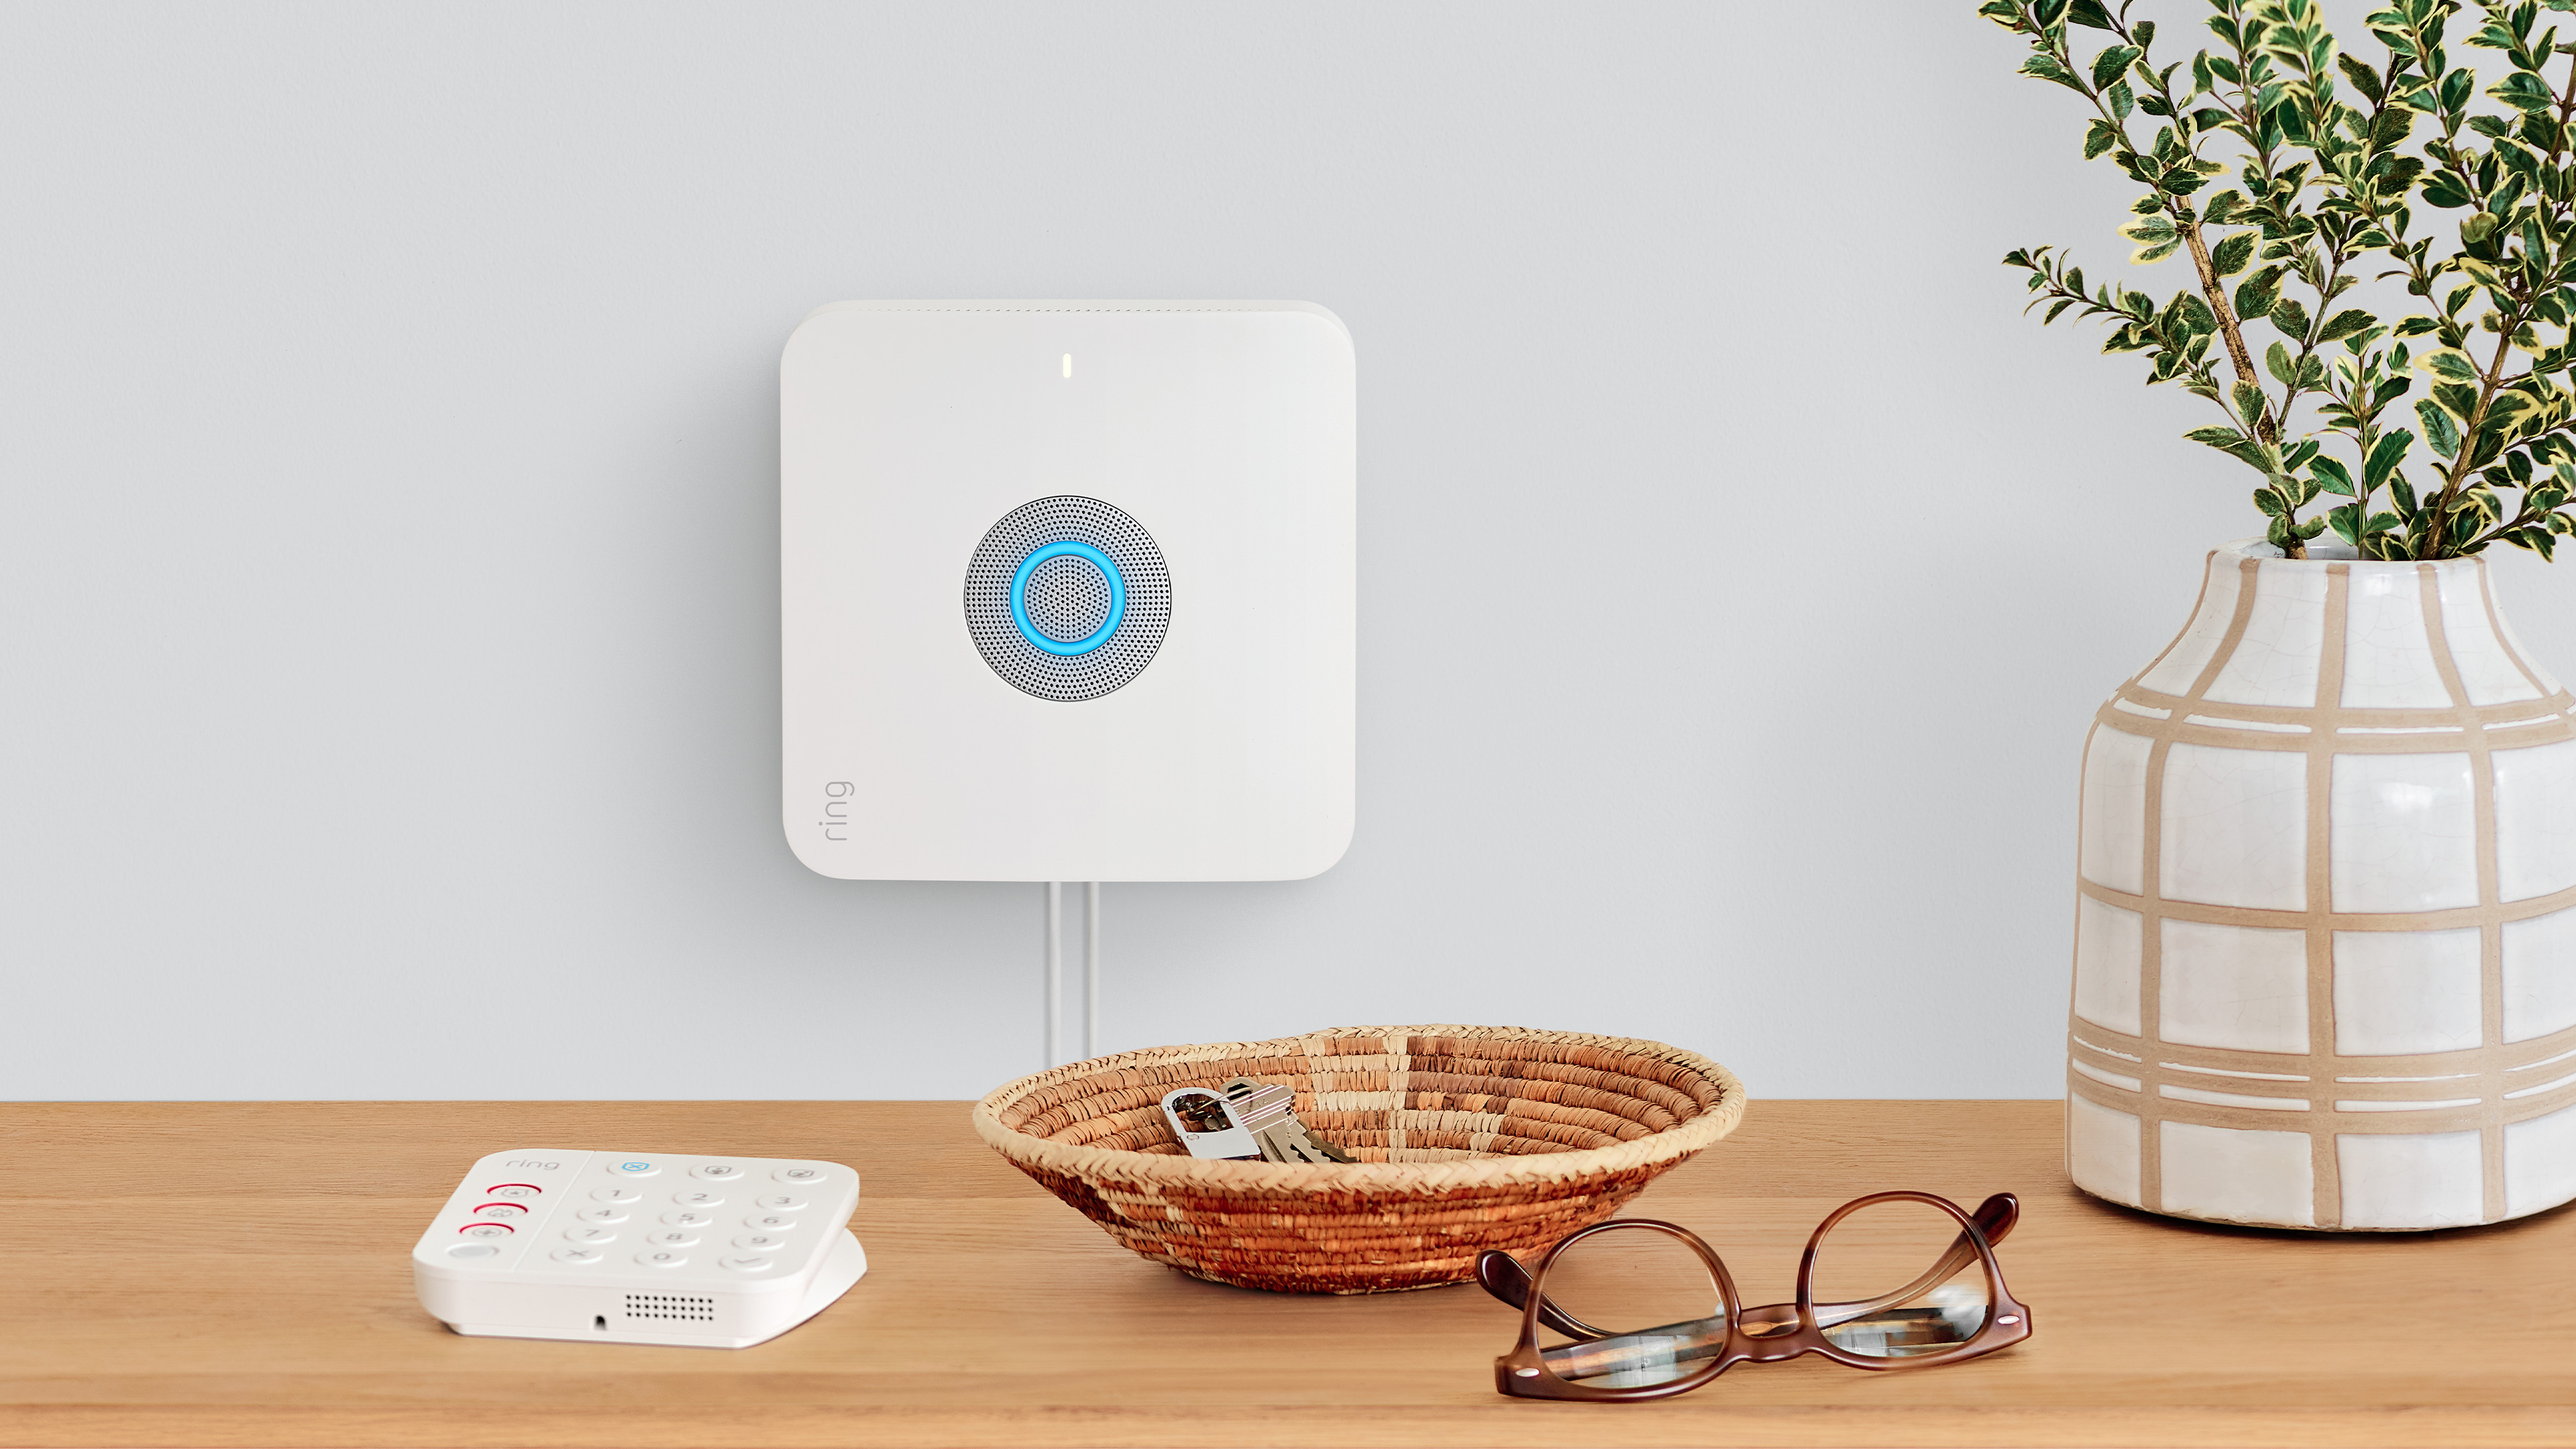 Ring announces new smart intercom extension for apartment buildings